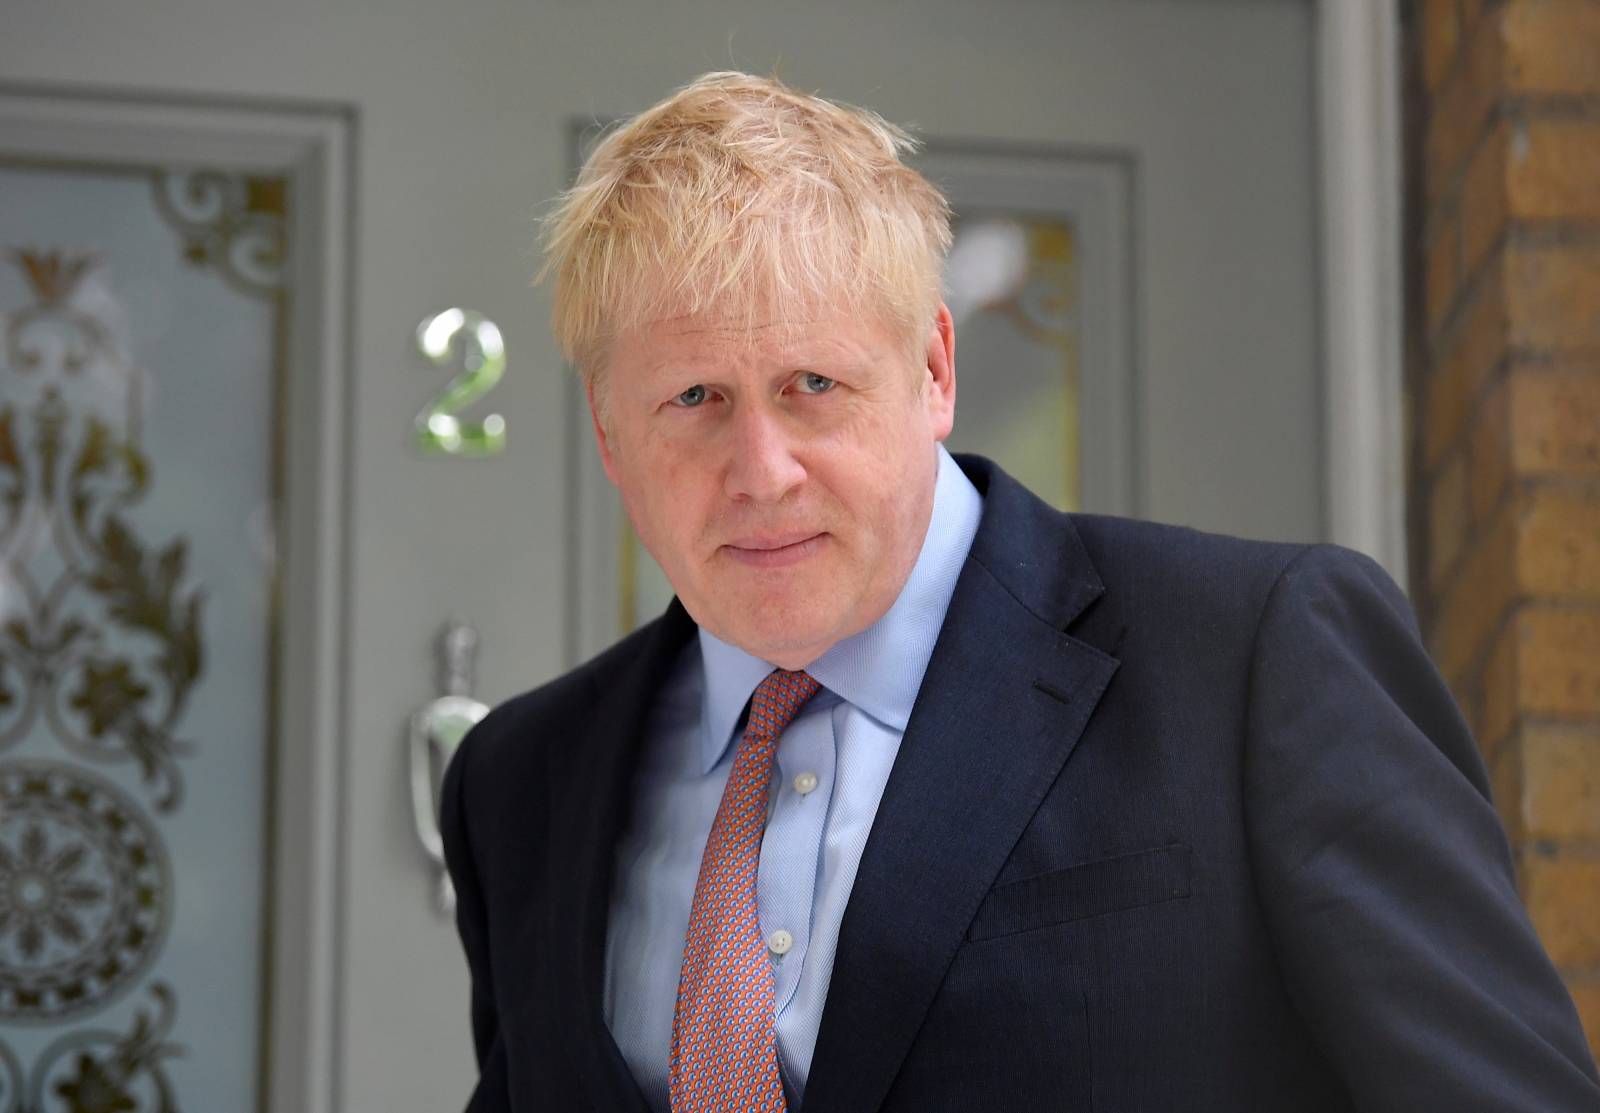 Boris Johnson, leadership candidate for Britain's Conservative Prime Minister, leaves home in London